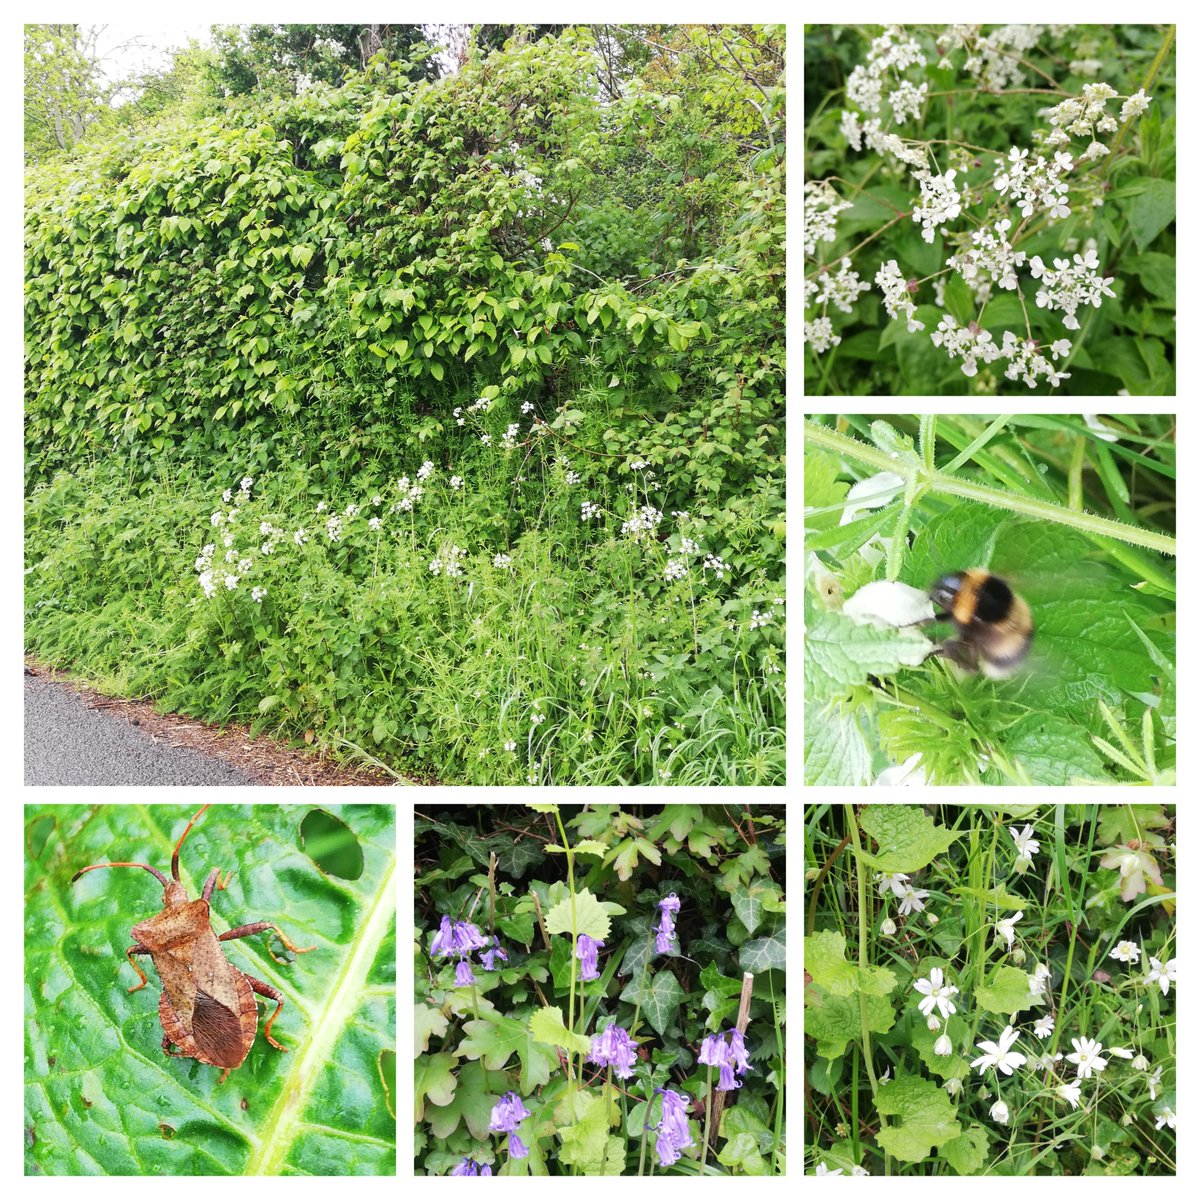 Taking time to fully appreciate hedgerows this week #NationalHedgerowWeek and observe animals sheltering from the odd shower🌧️